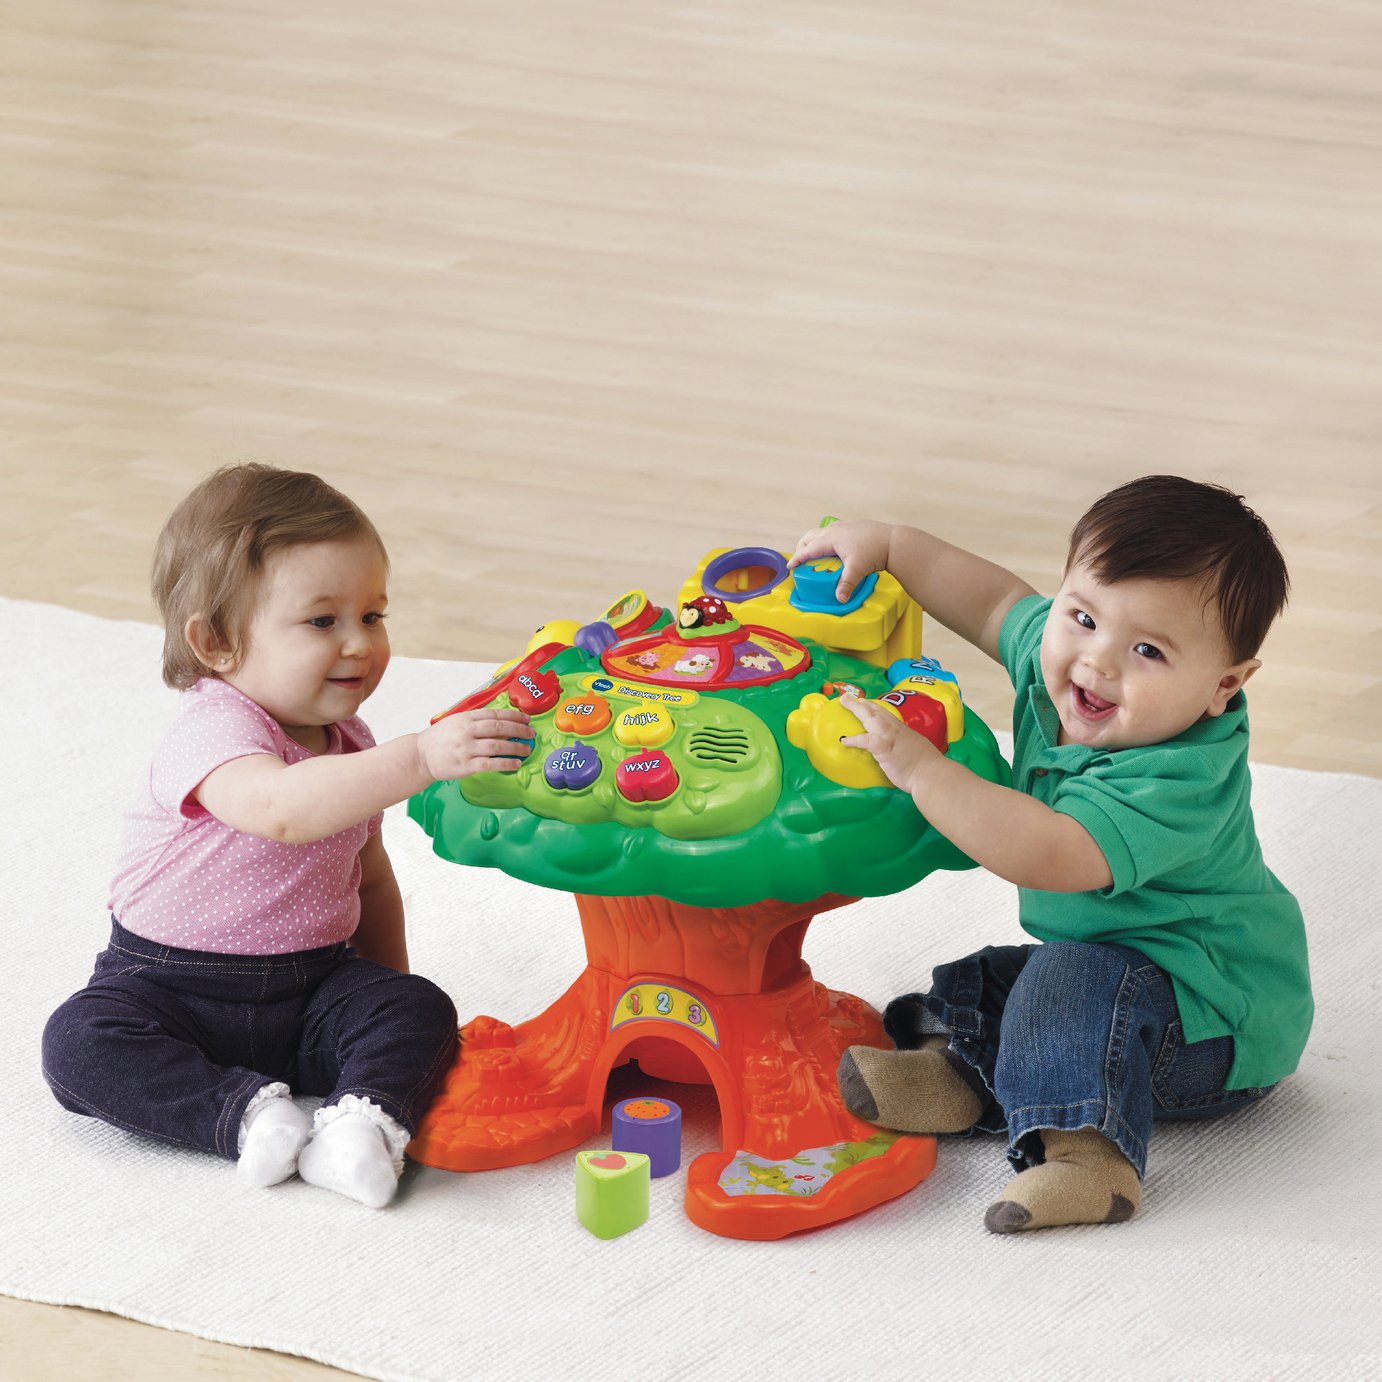 VTech Discovery Tree Review